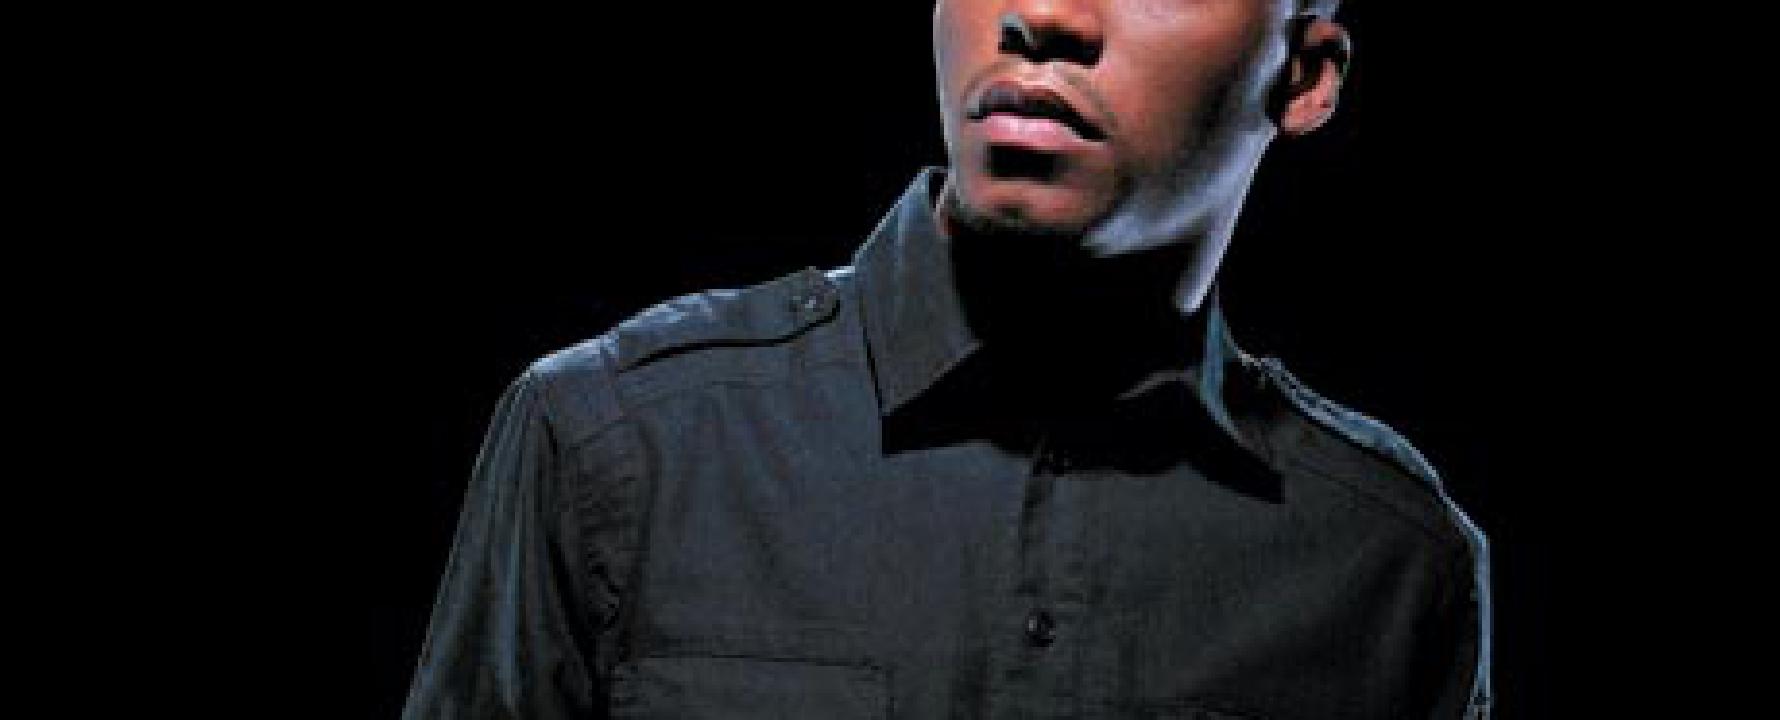 Promotional photograph of Lupe Fiasco.